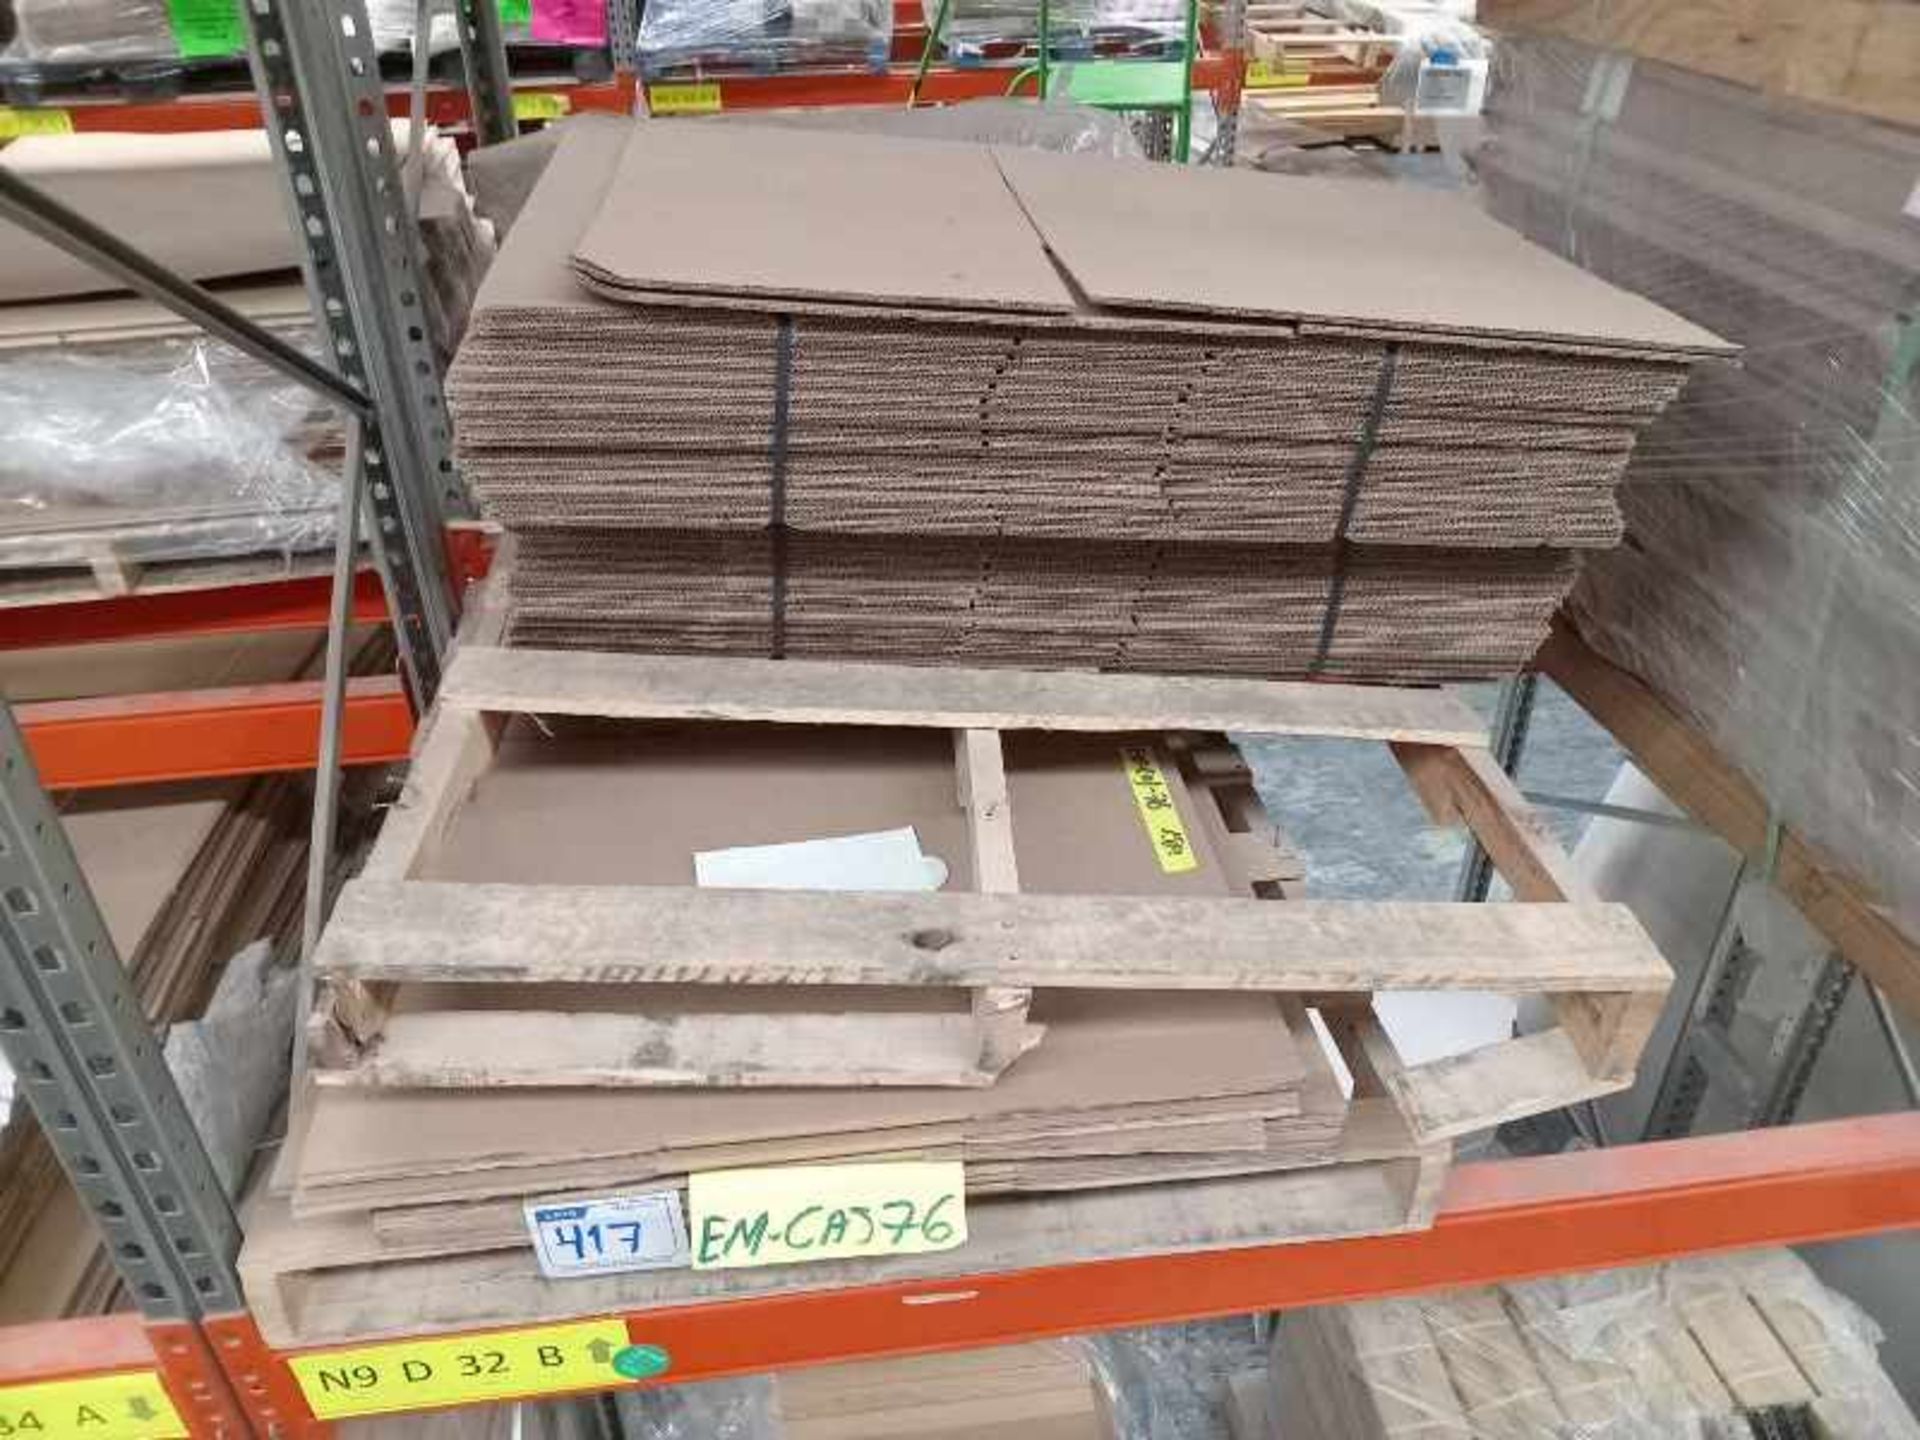 LOT OF APPROXIMATELY (83,310) PCS OF CARDBOARD BOXES AND ACCESSORIES - Image 27 of 119